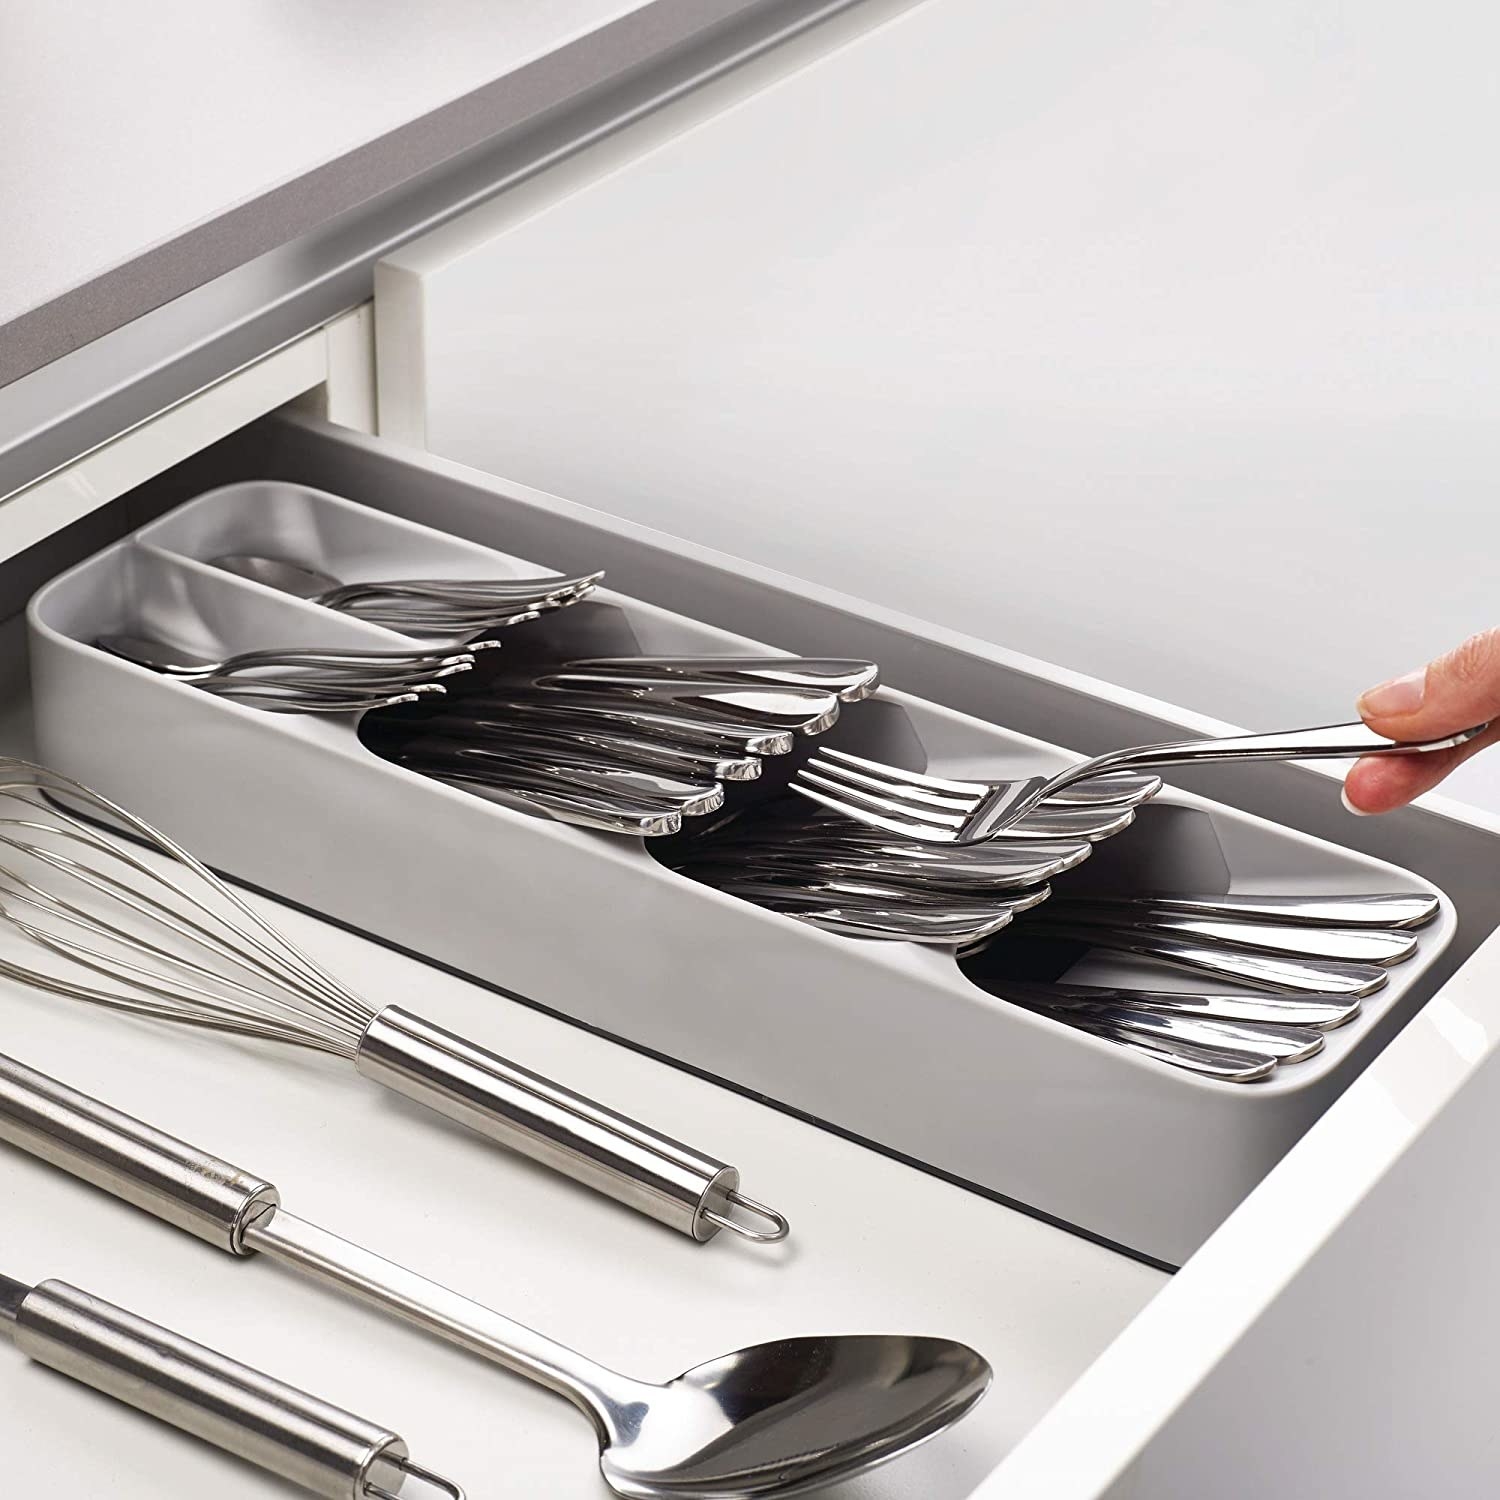 A person places a fork into the organizer